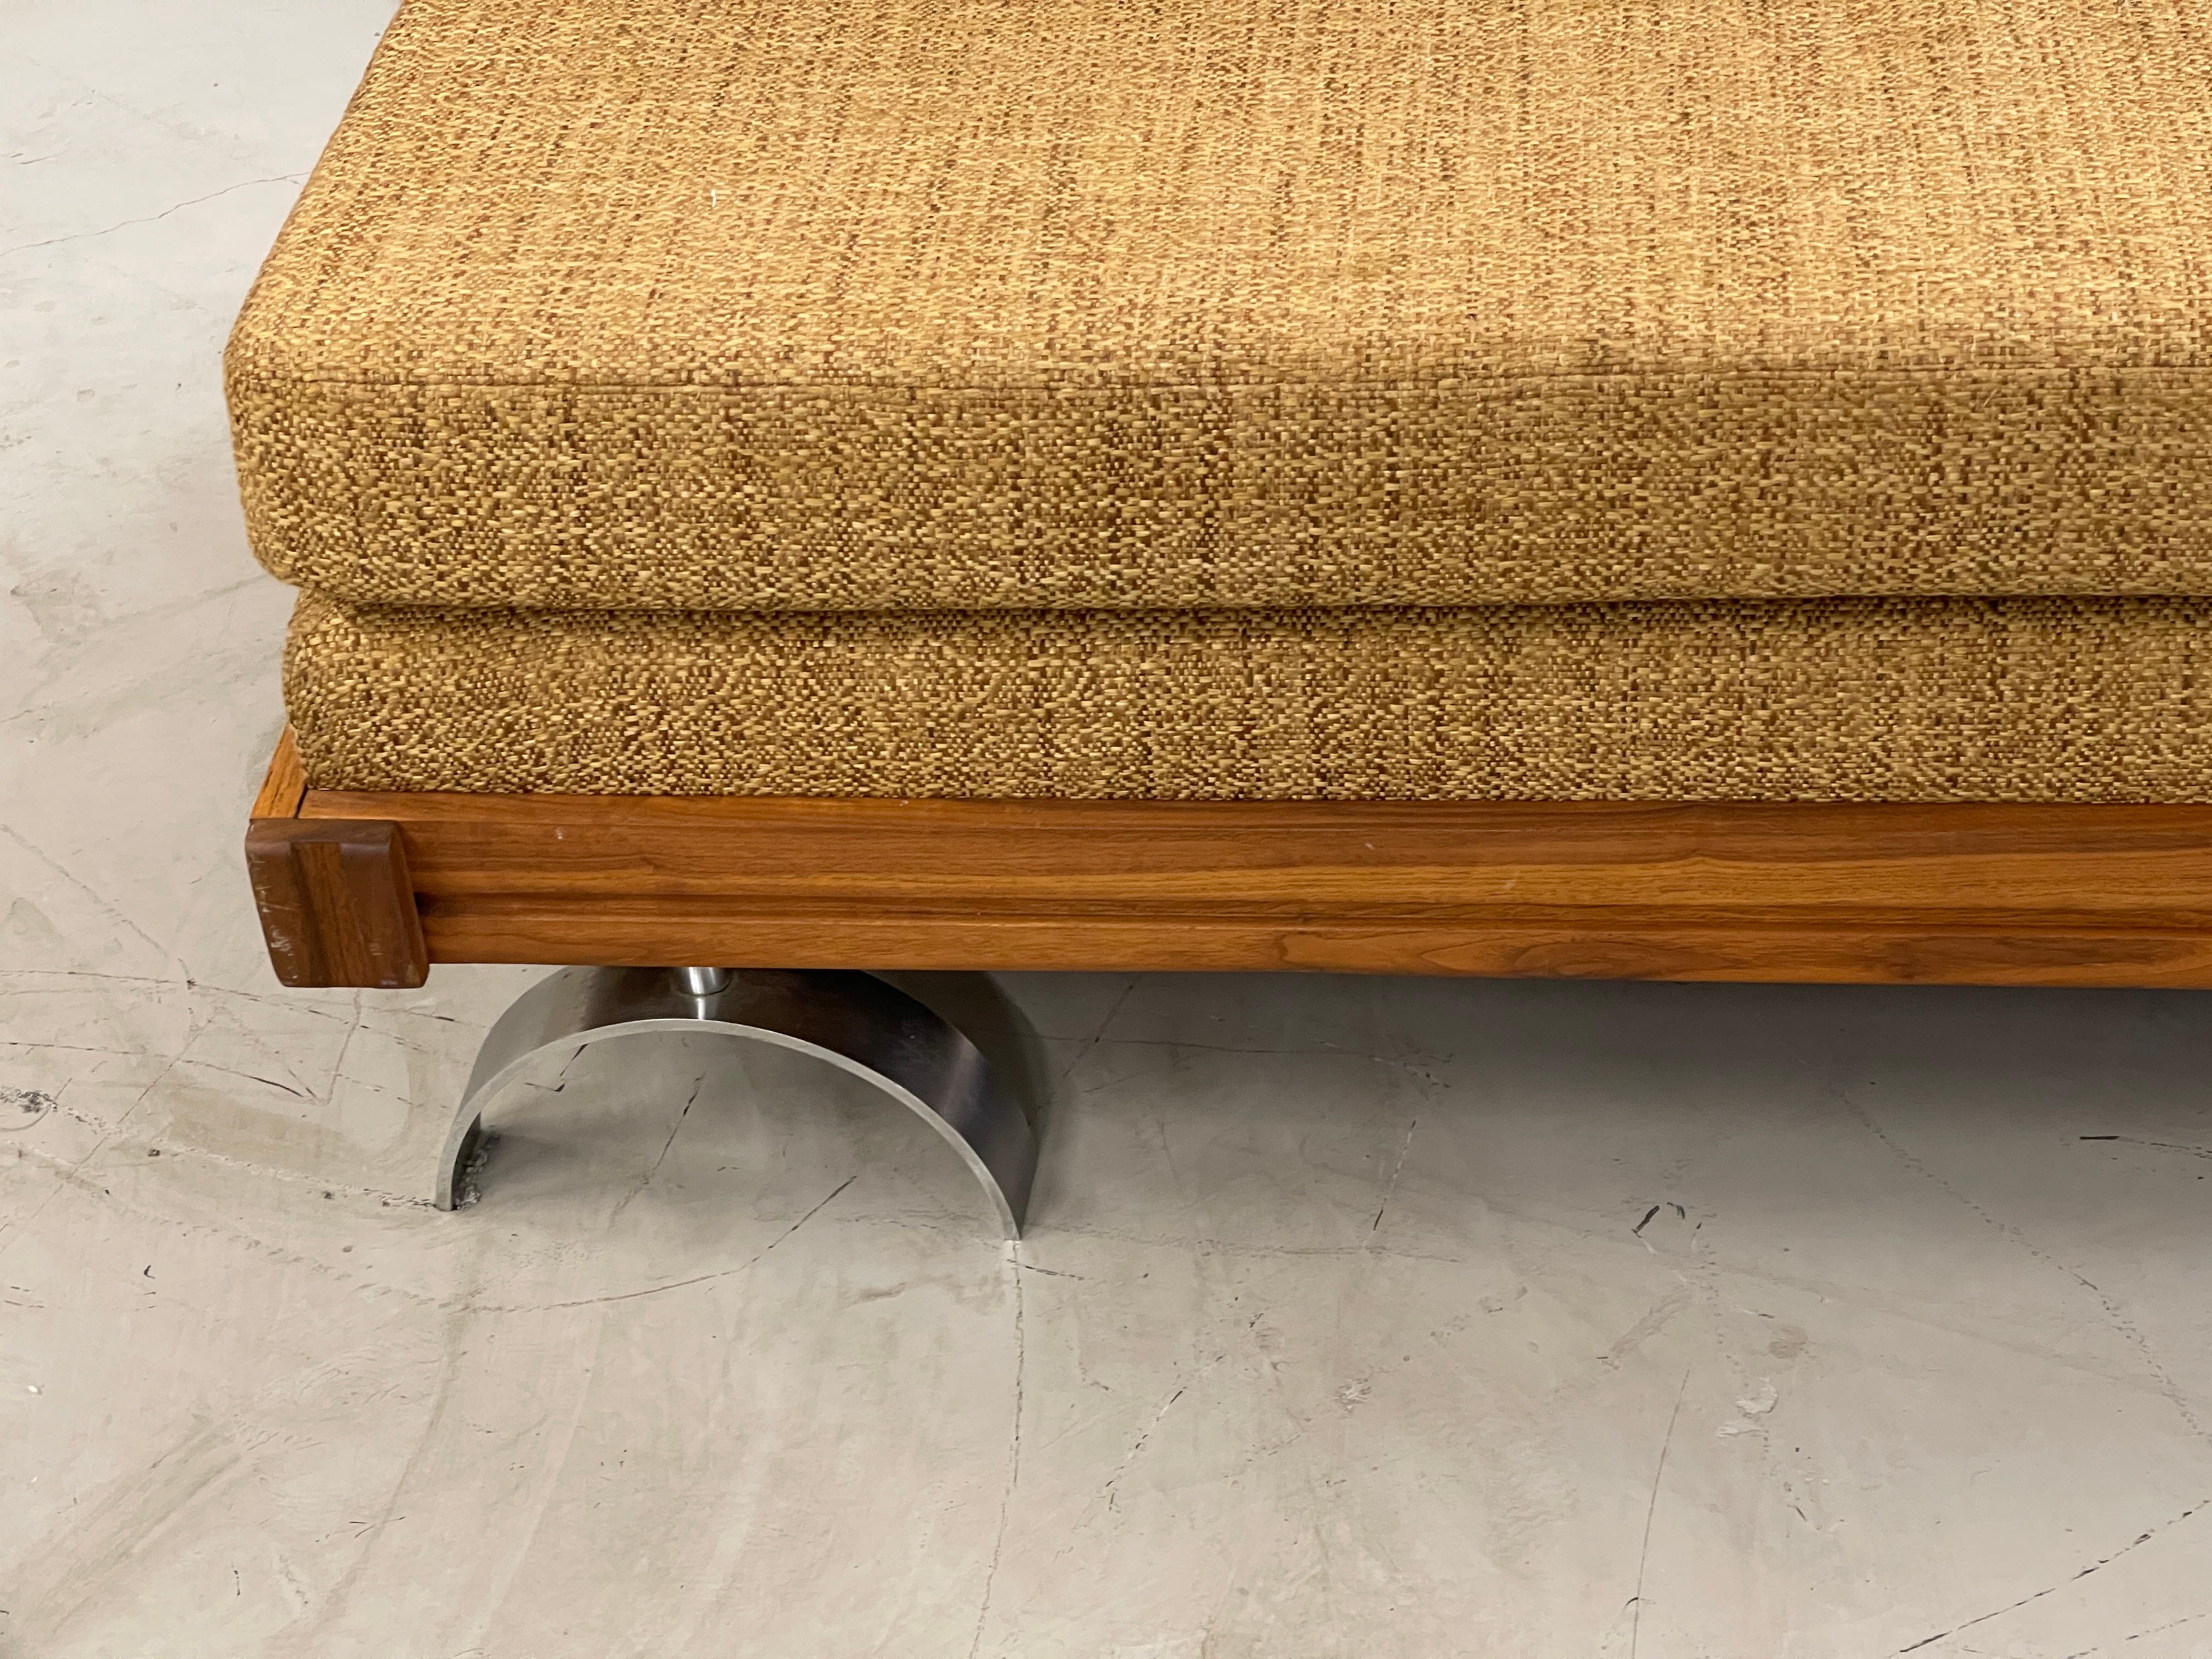 Beautiful sofa by Martin Borenstein. Vintage piece in good condition. Upholstery appears original and has been cleaned. Teak frame and surface is good with some age appropriate wear and marks. Metal legs are in good condition.